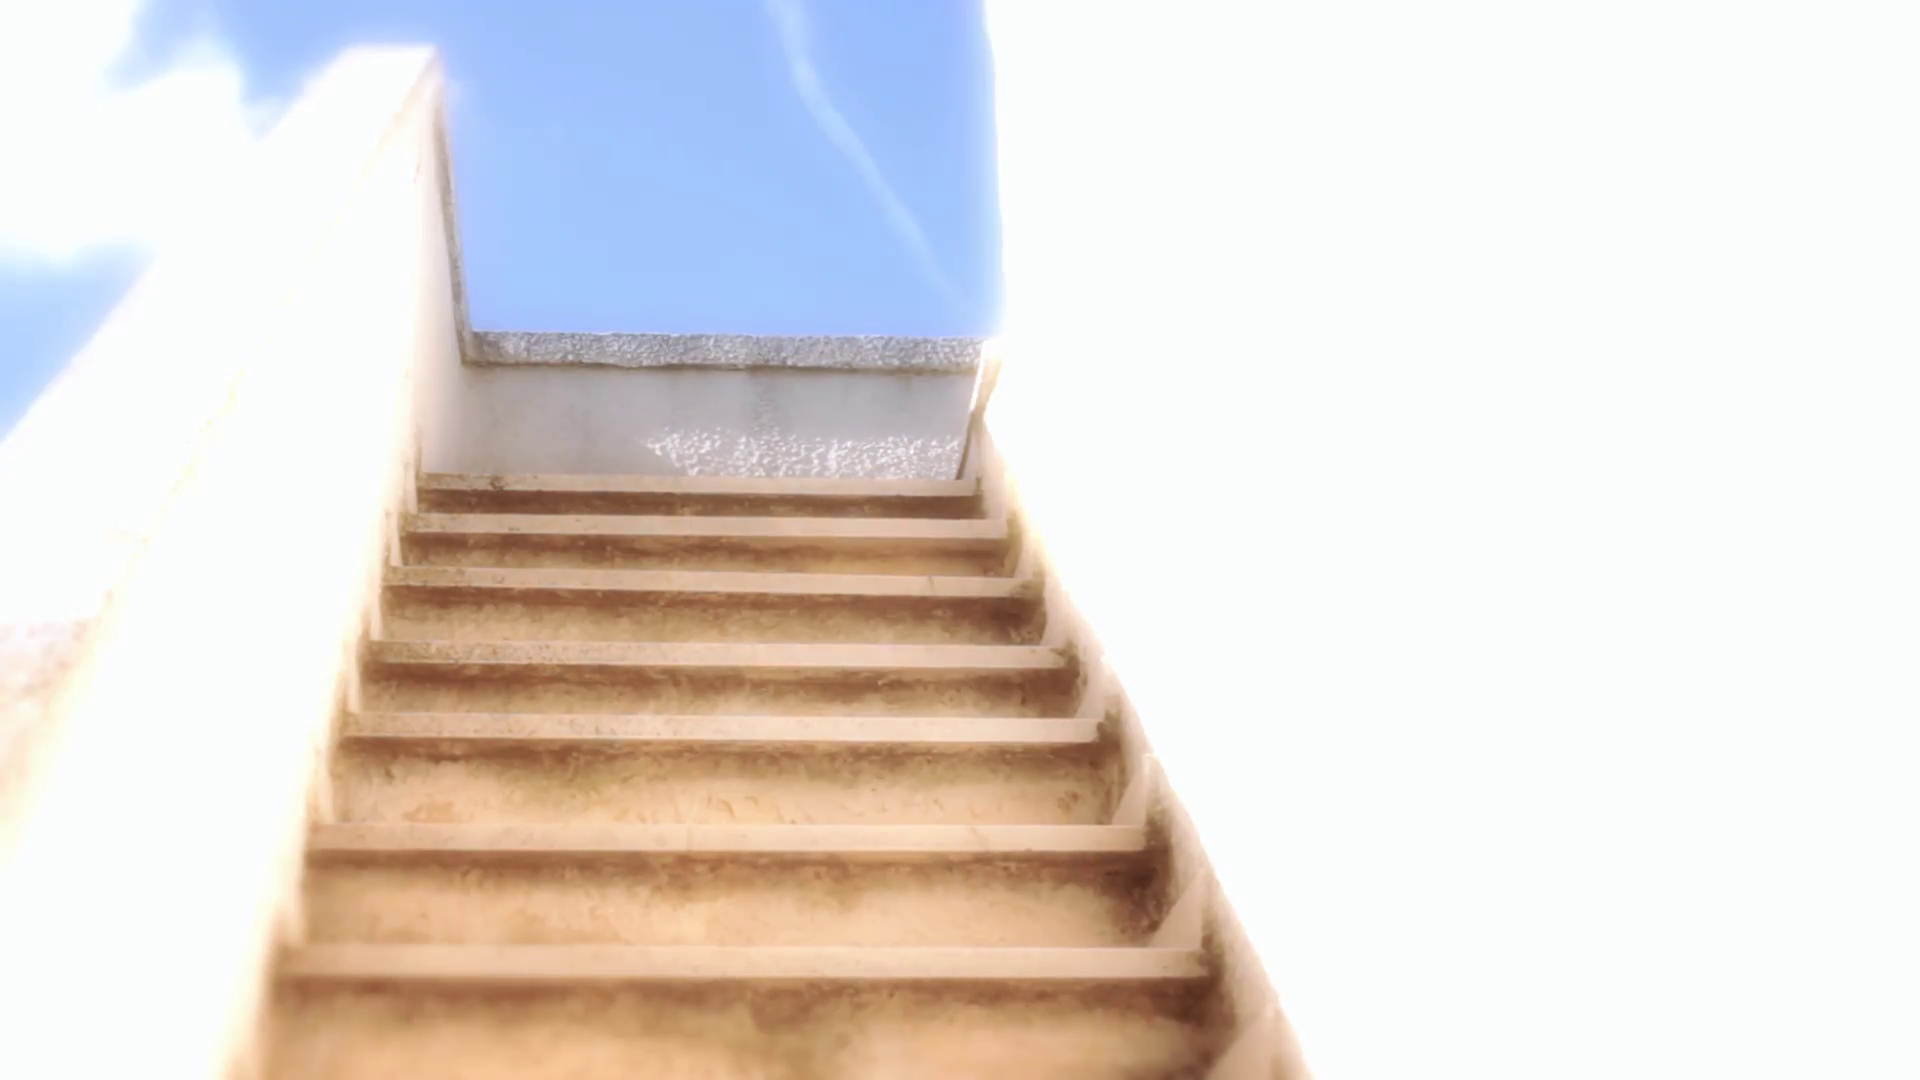 Stairway to Heaven copyspace. A stairway to Heaven: white glowing ...